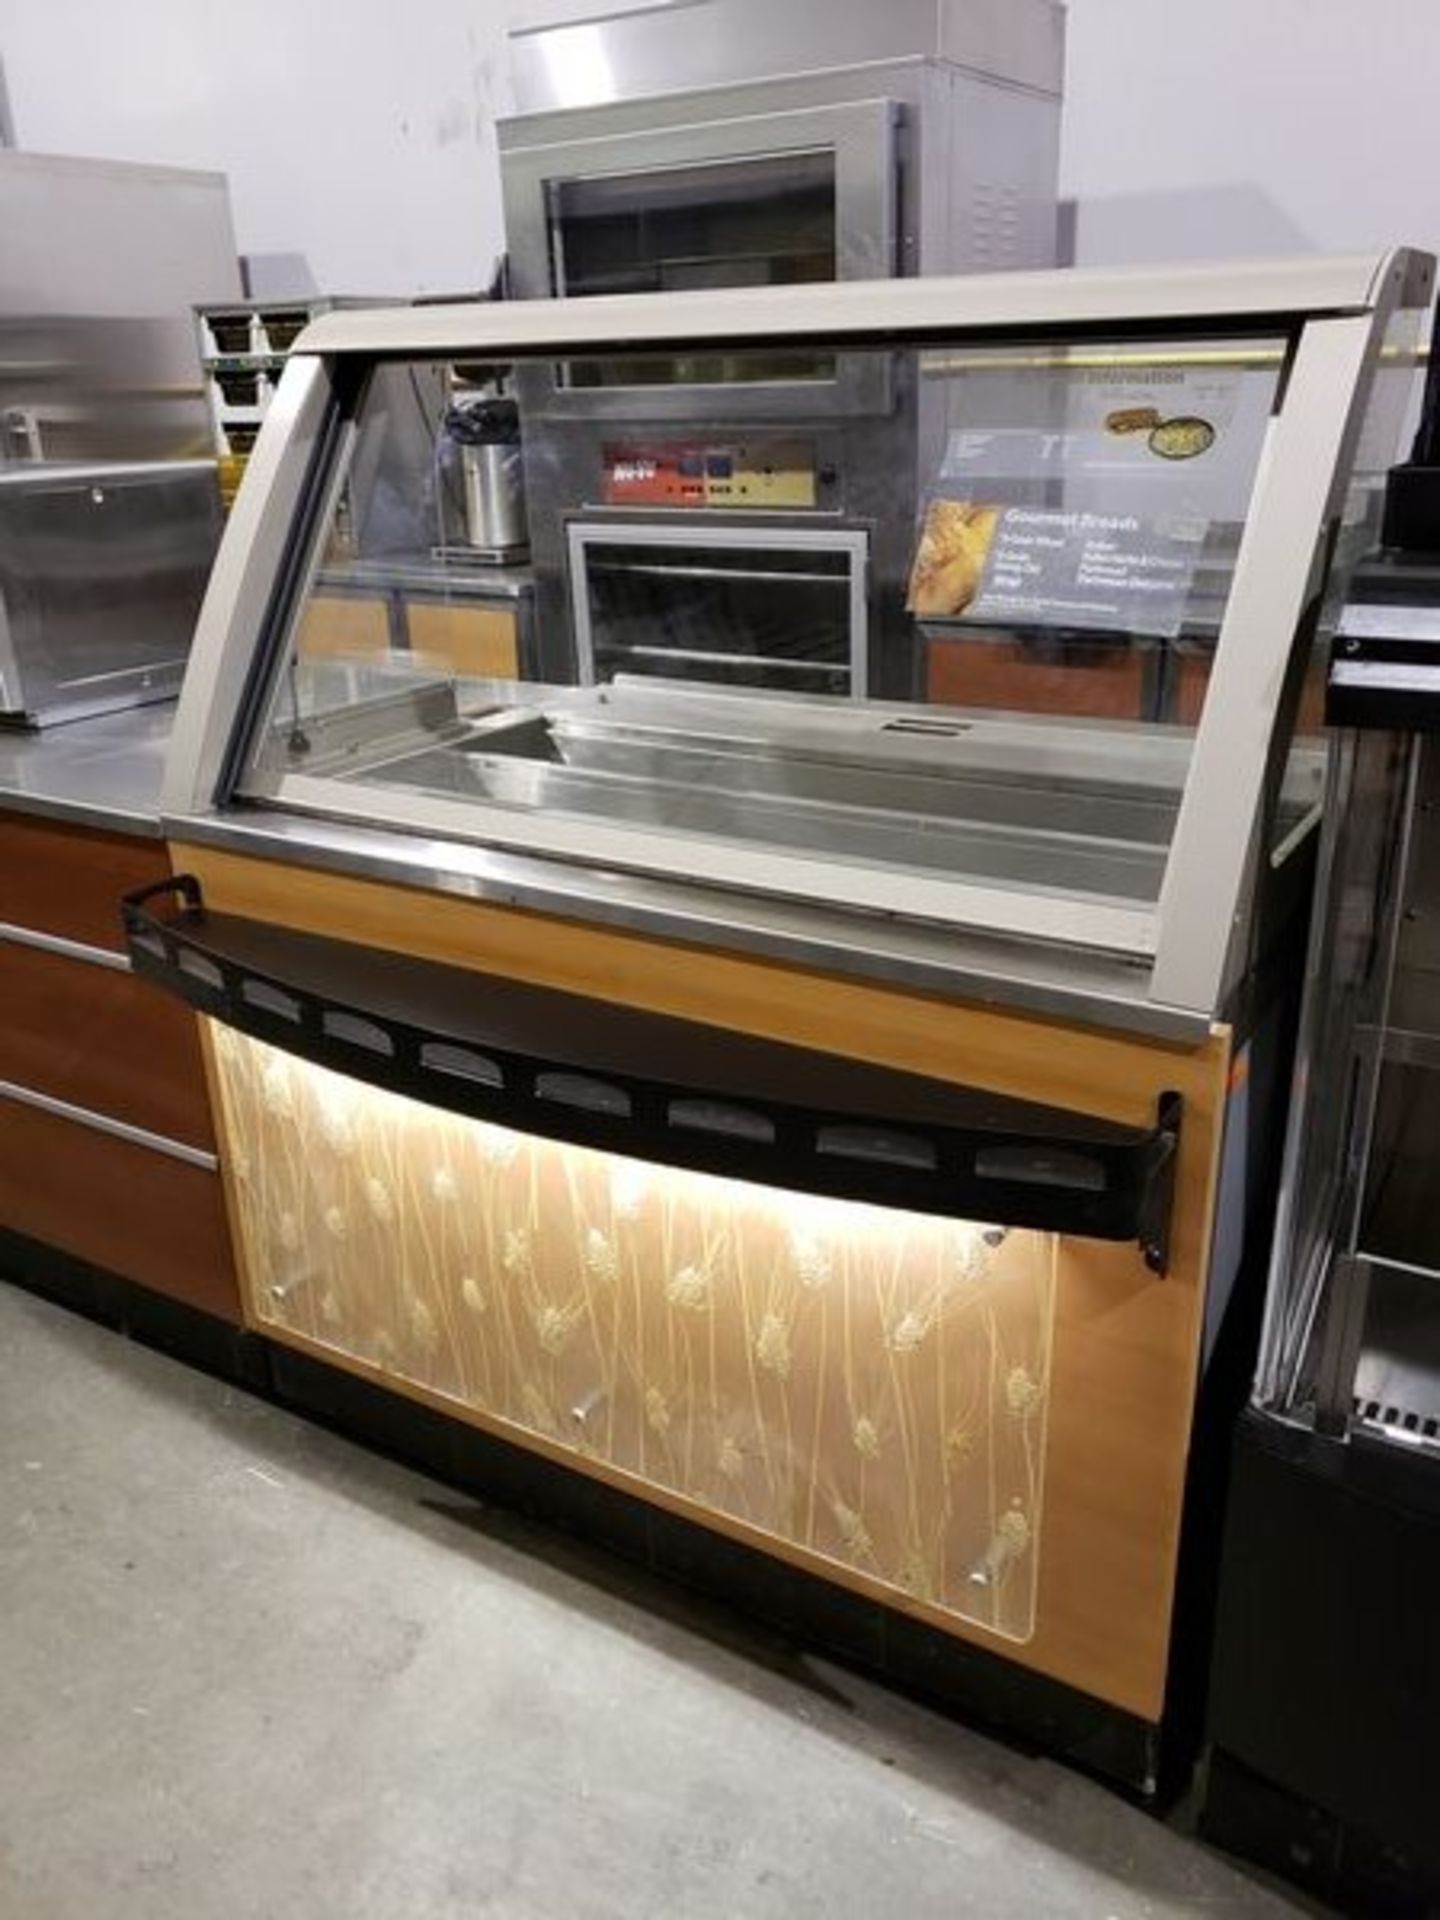 Duke 48" Refrigerated Prep Counter - Complete with Front and Top Lighting and Drop Down Sneeze Guard - Image 2 of 2